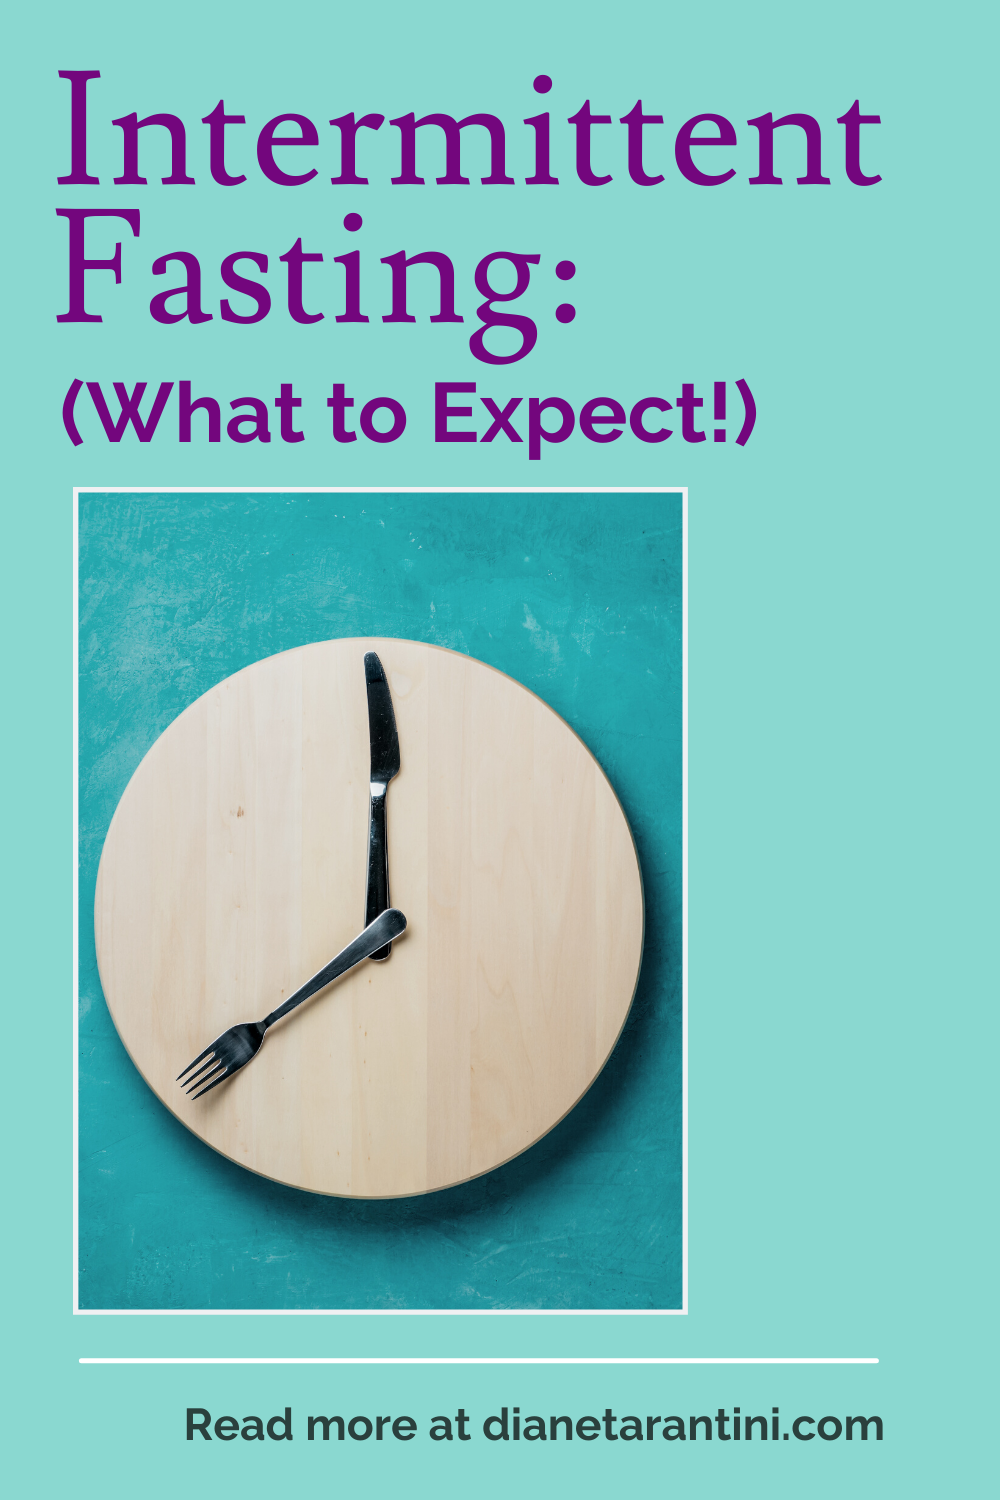 What to expect with intermittent fasting